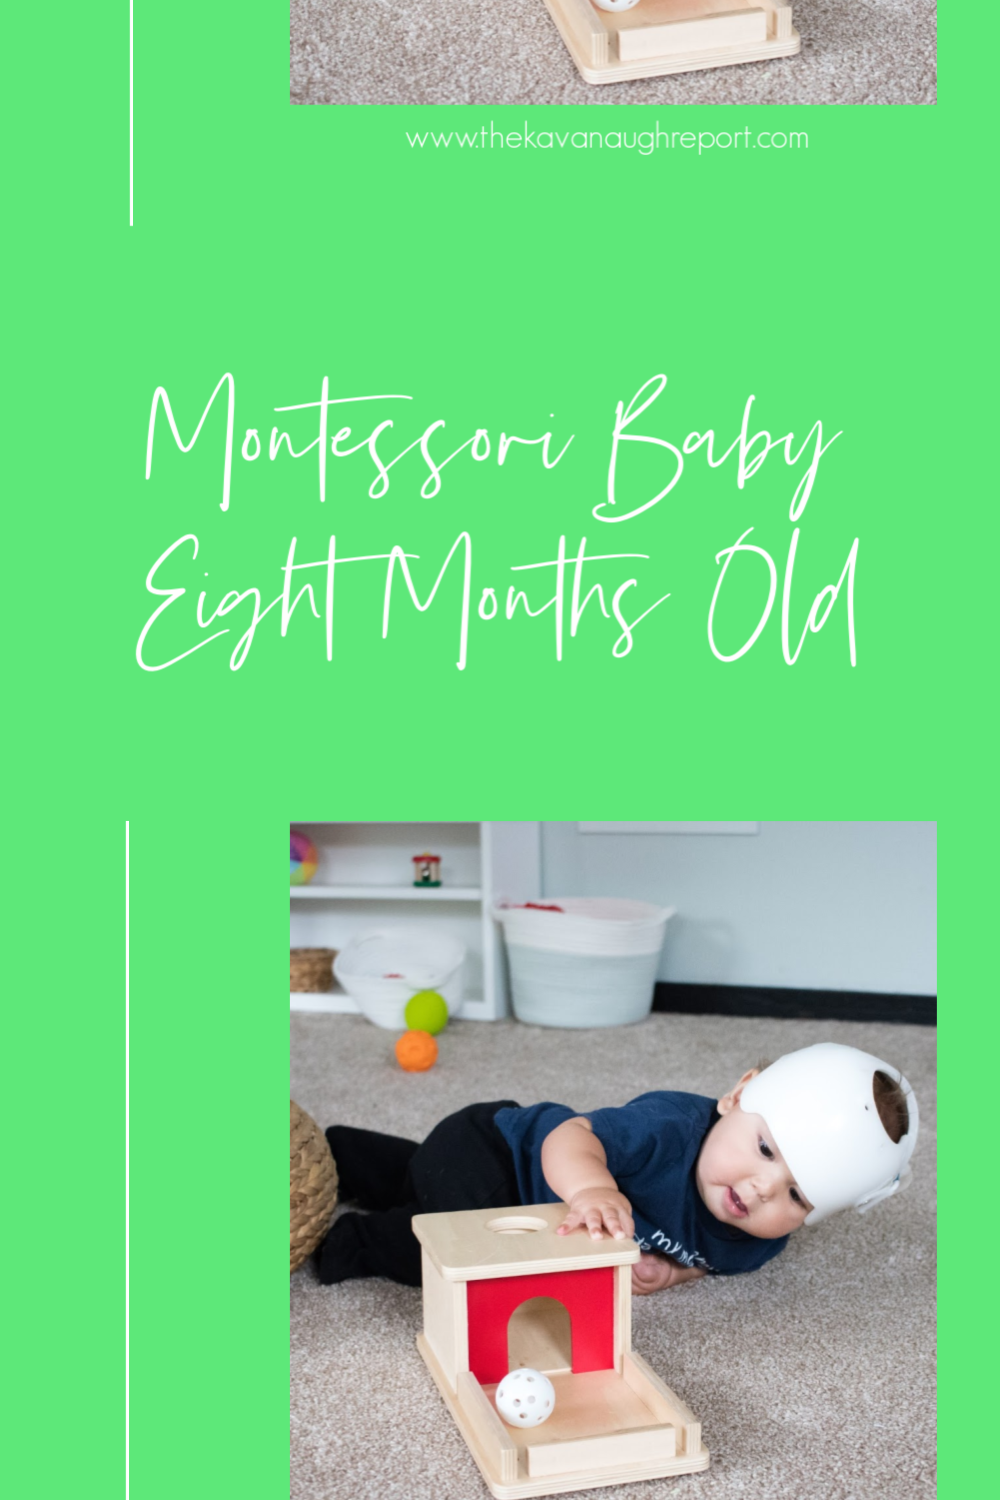 Using the Montessori method with your 8-month-old - articles and tips for using Montessori with your baby